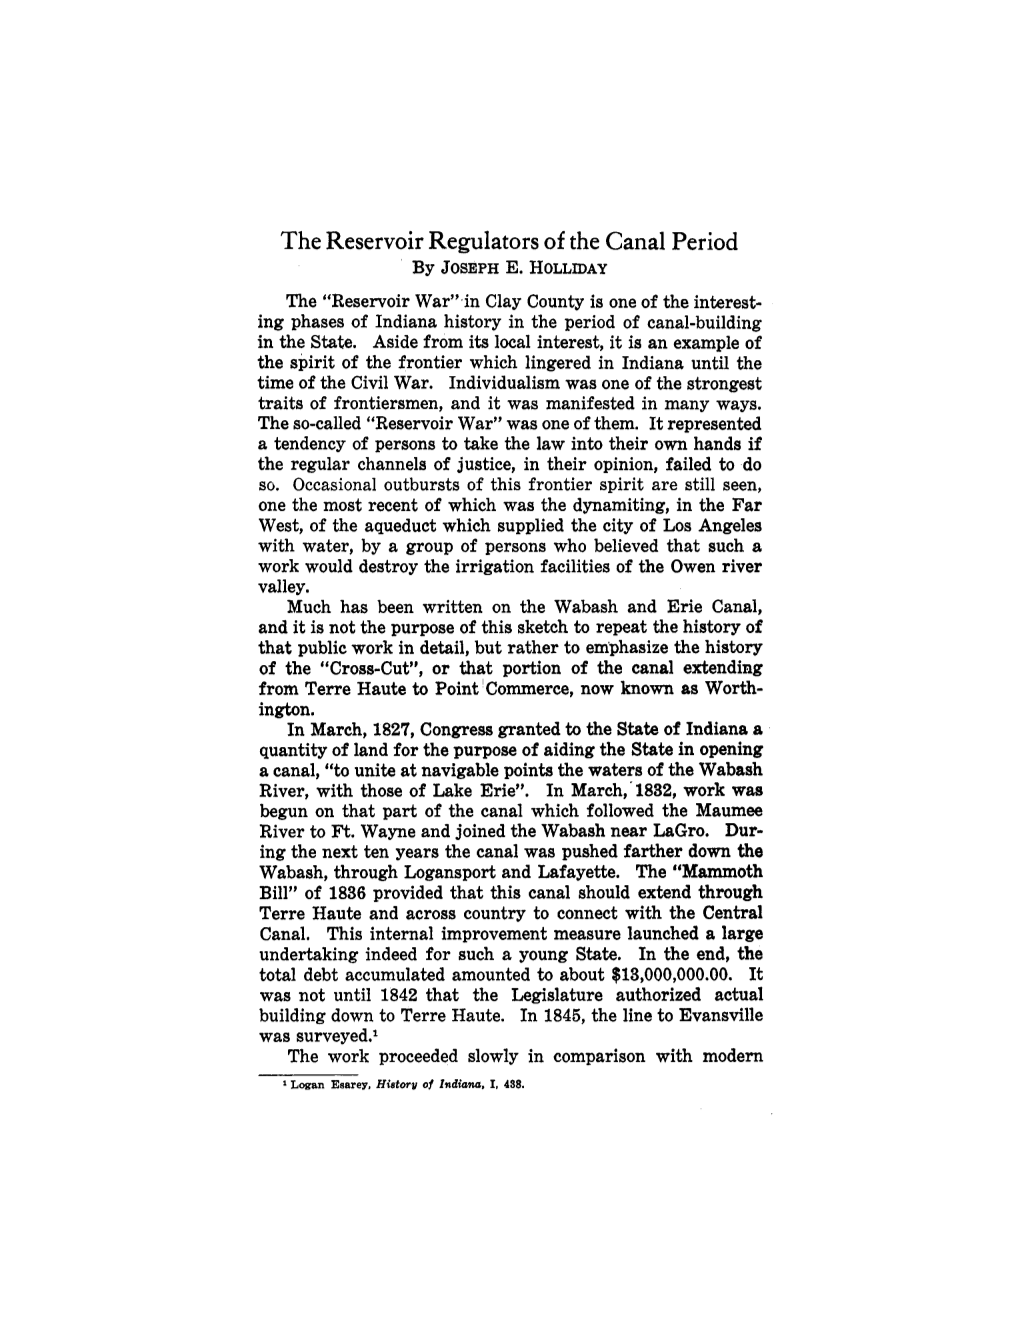 The Reservoir Regulators of the Canal Period by JOSEPHE